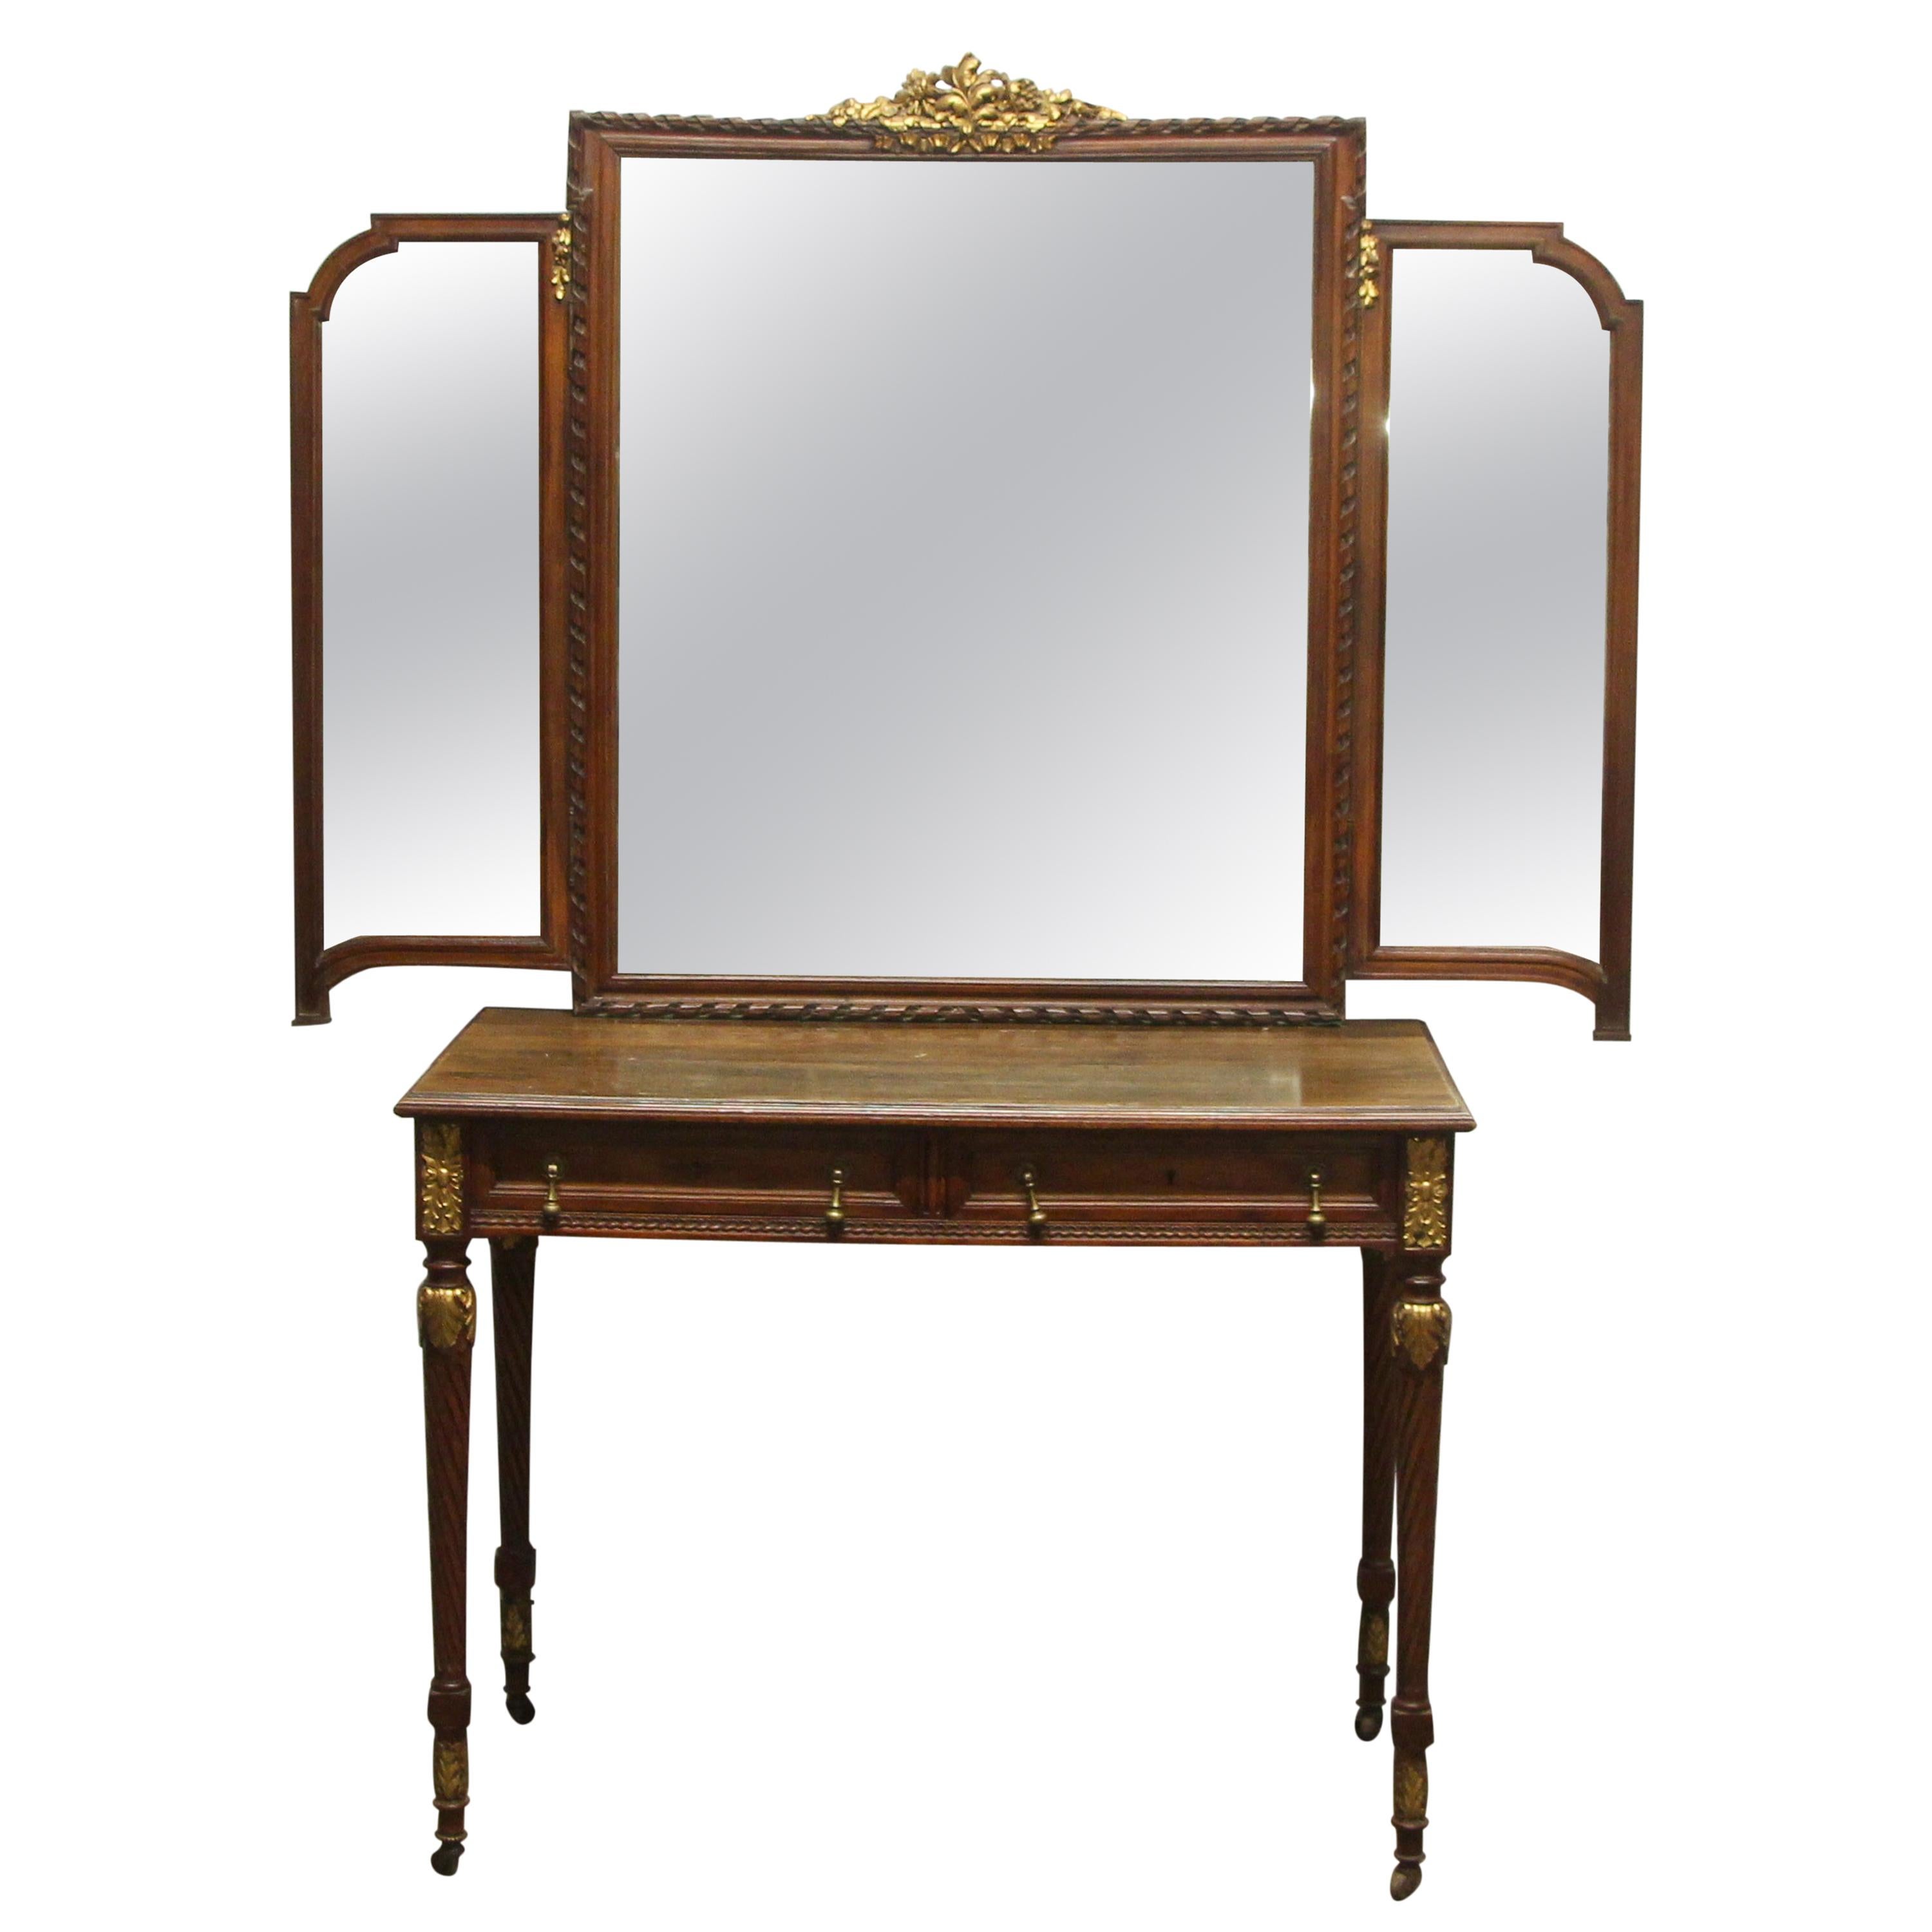 1930s French Art Deco Tri-fold Mirrored Vanity with 2 Drawers and Brass Pulls